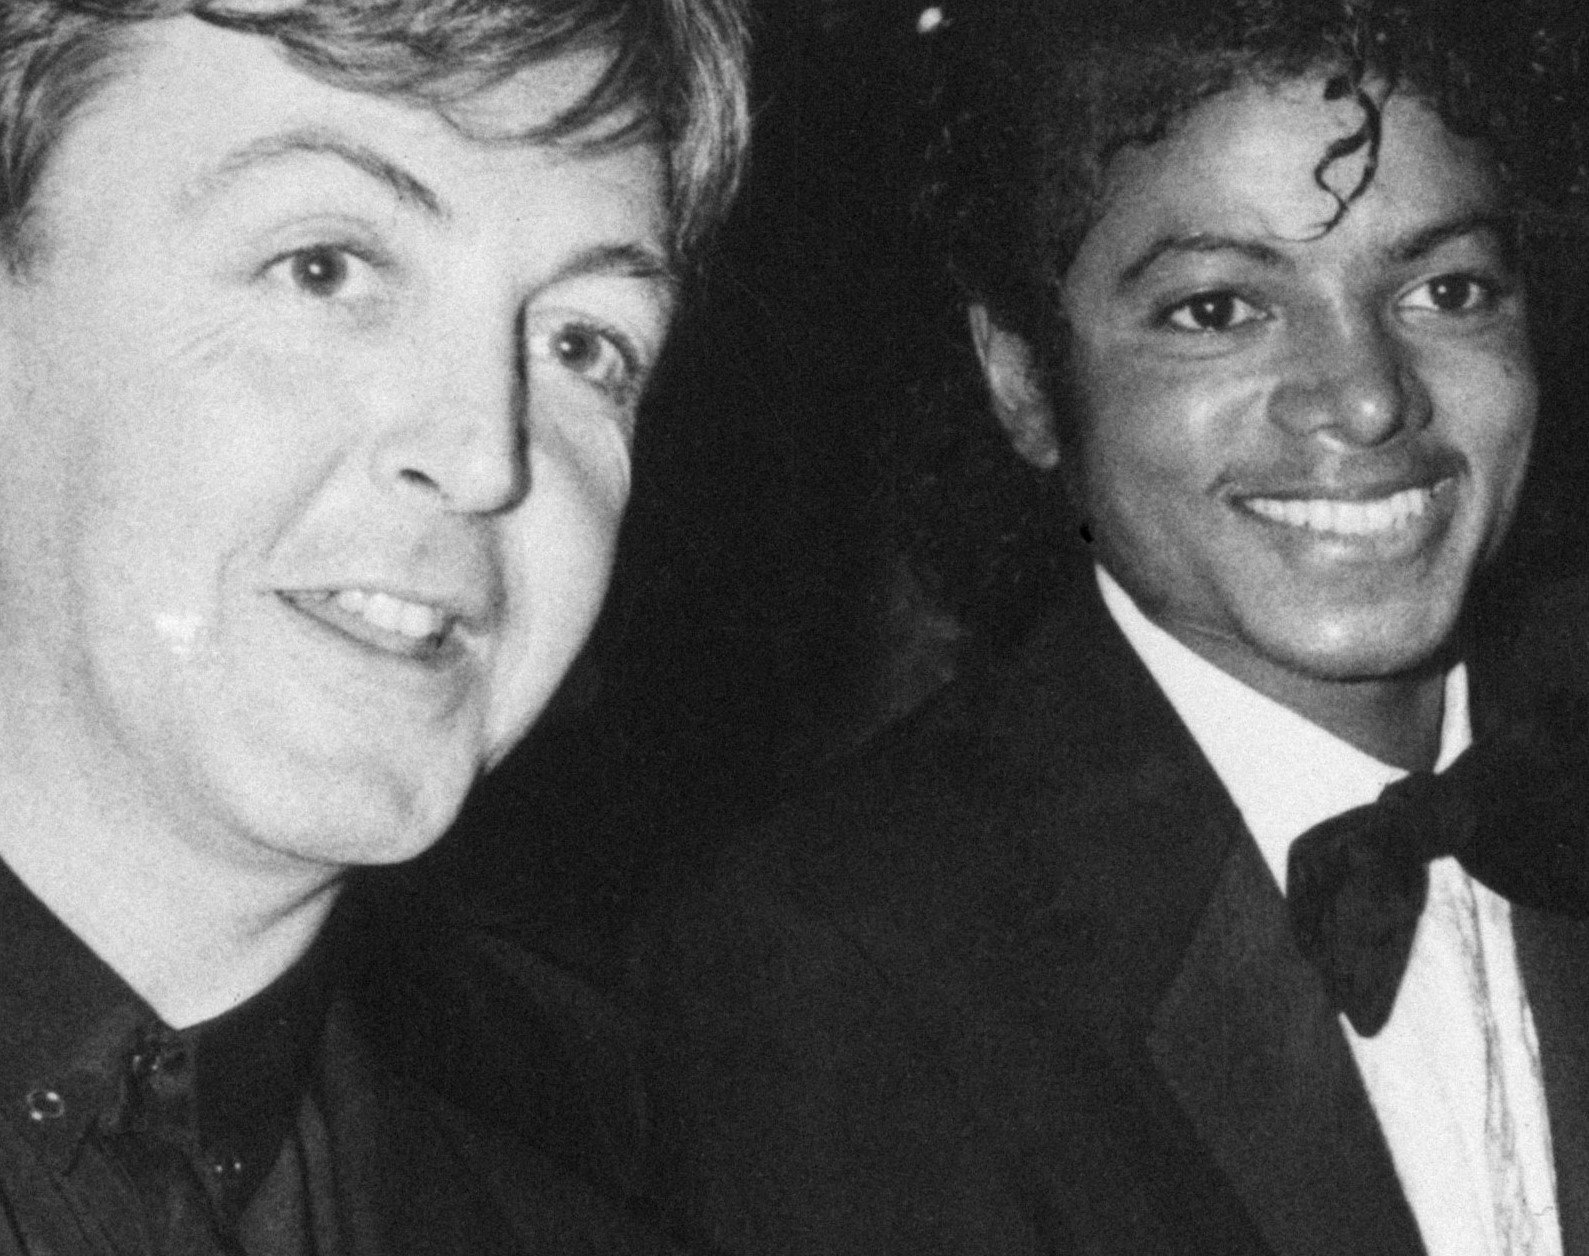 "Say Say Say" singers Paul McCartney and Michael Jackson in black-and-white